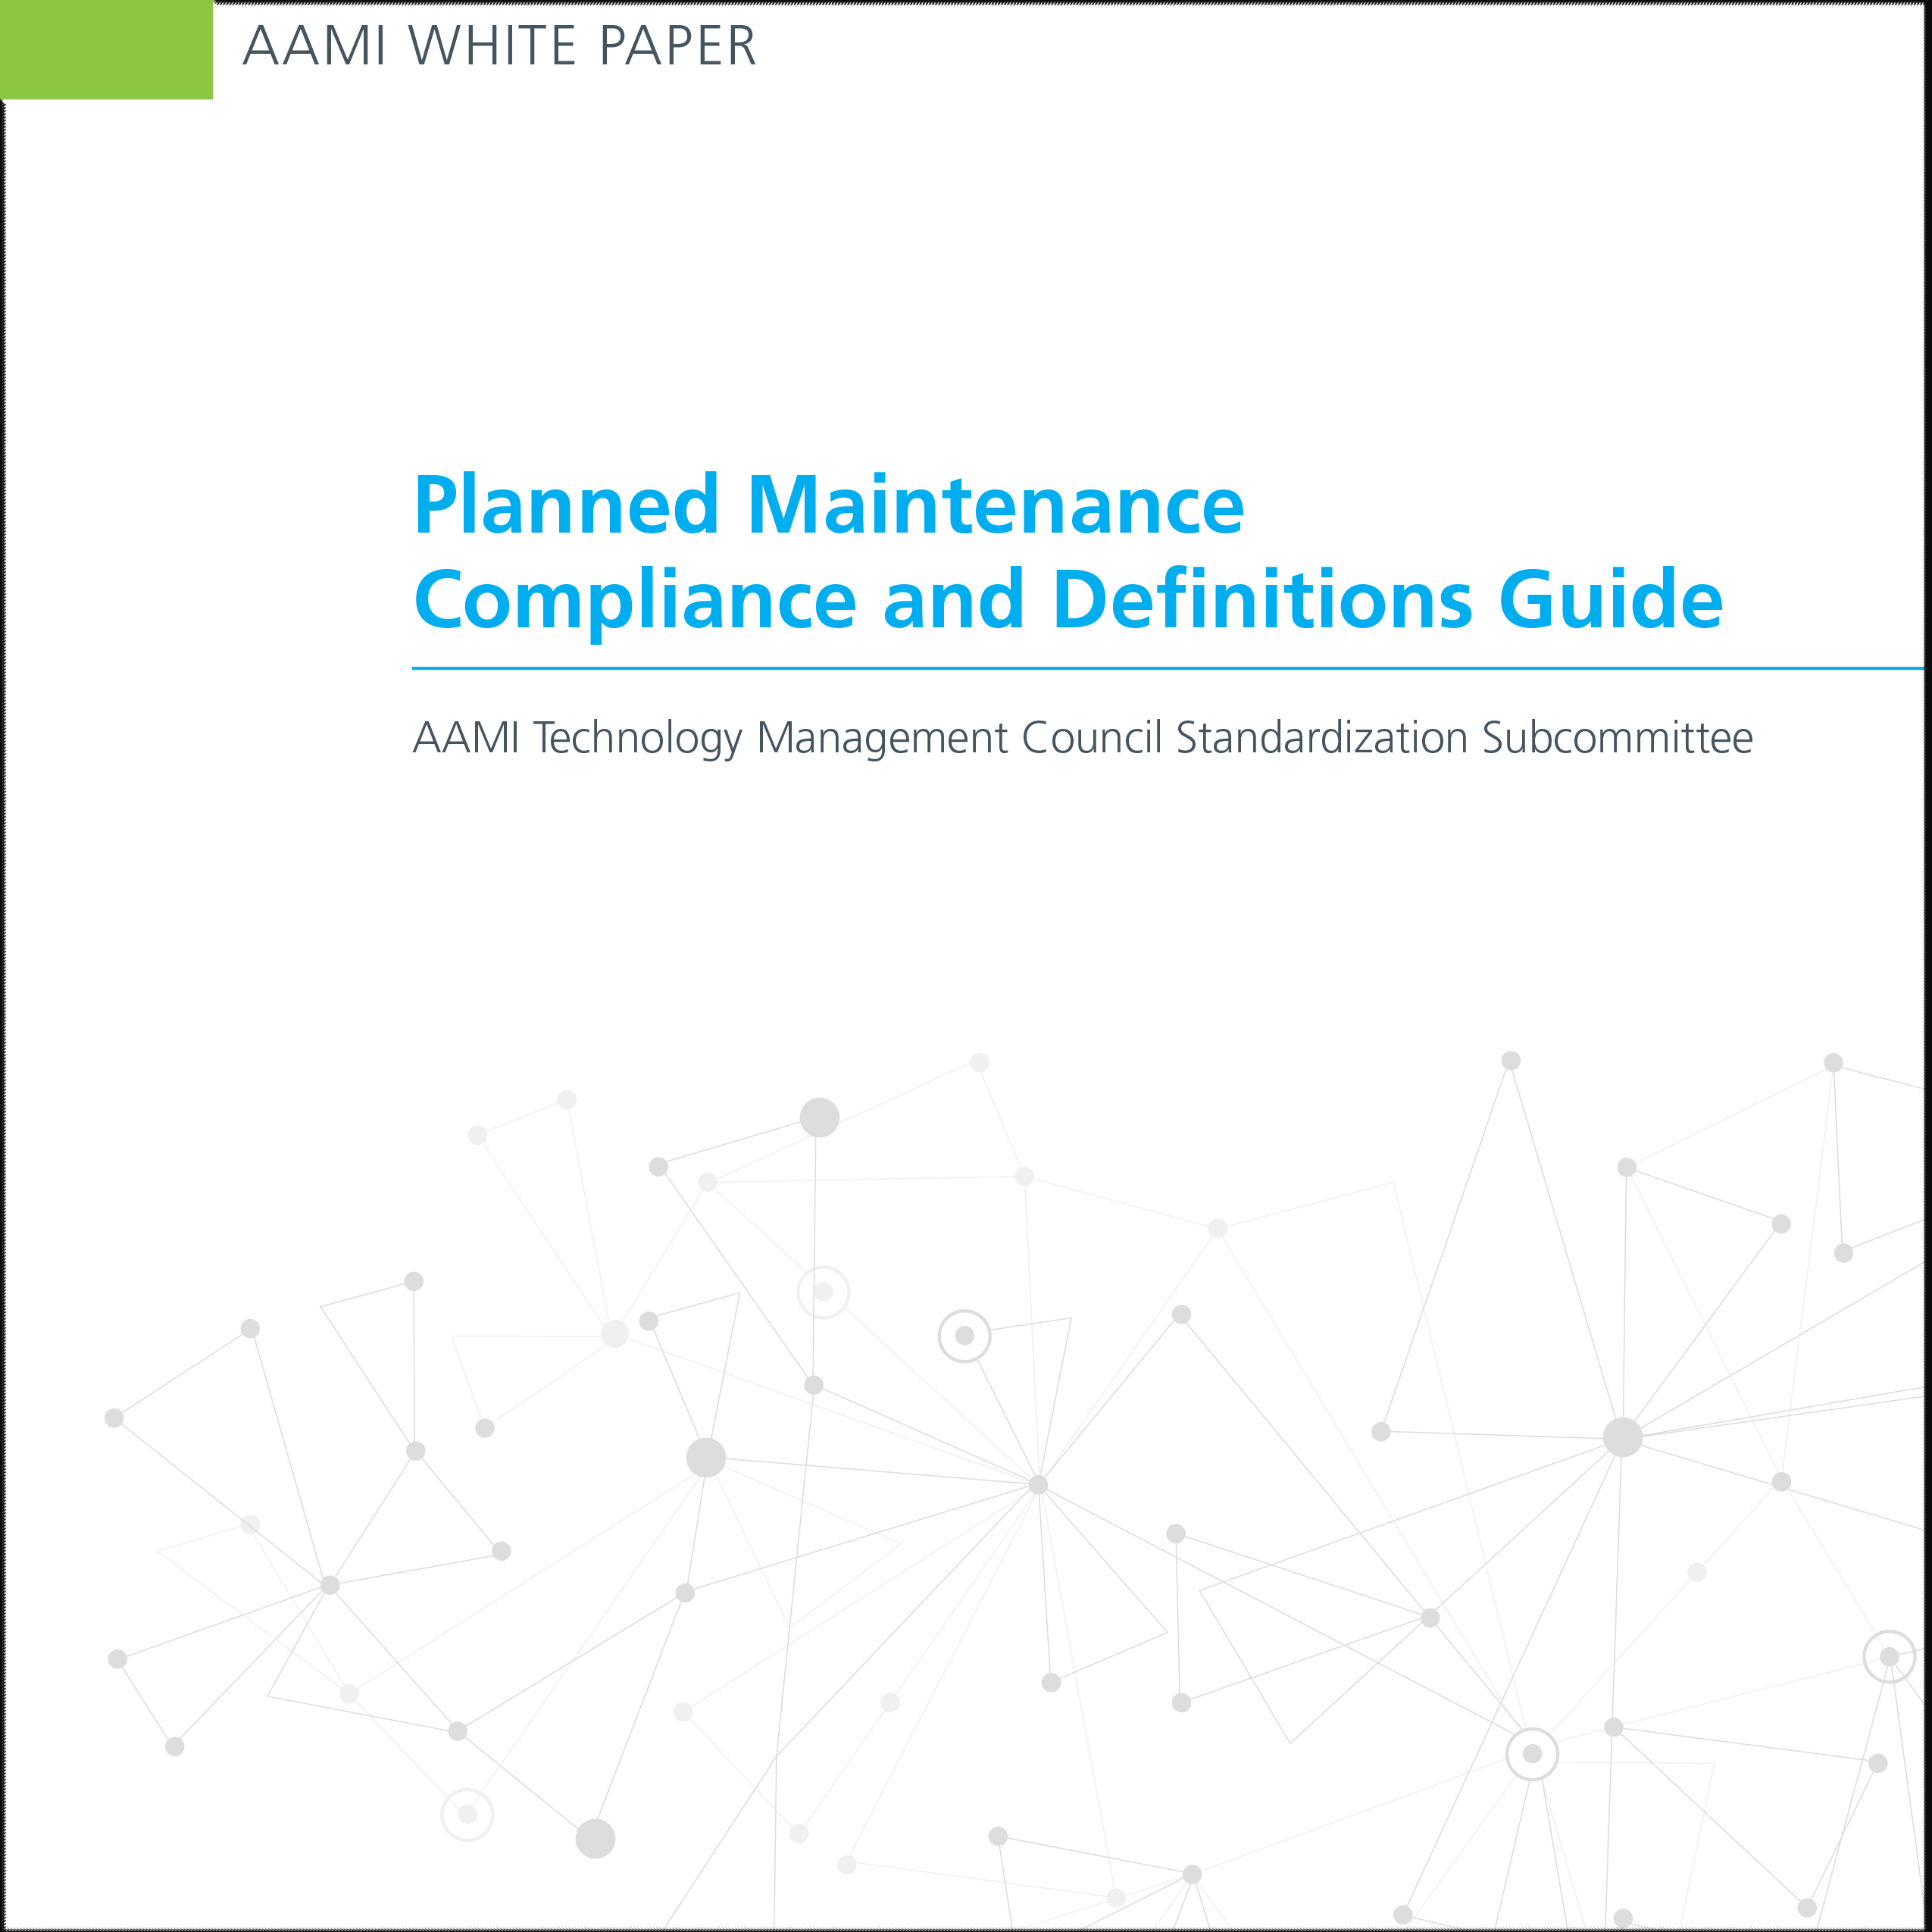 Planned Maintenance Compliance and Definitions Guide